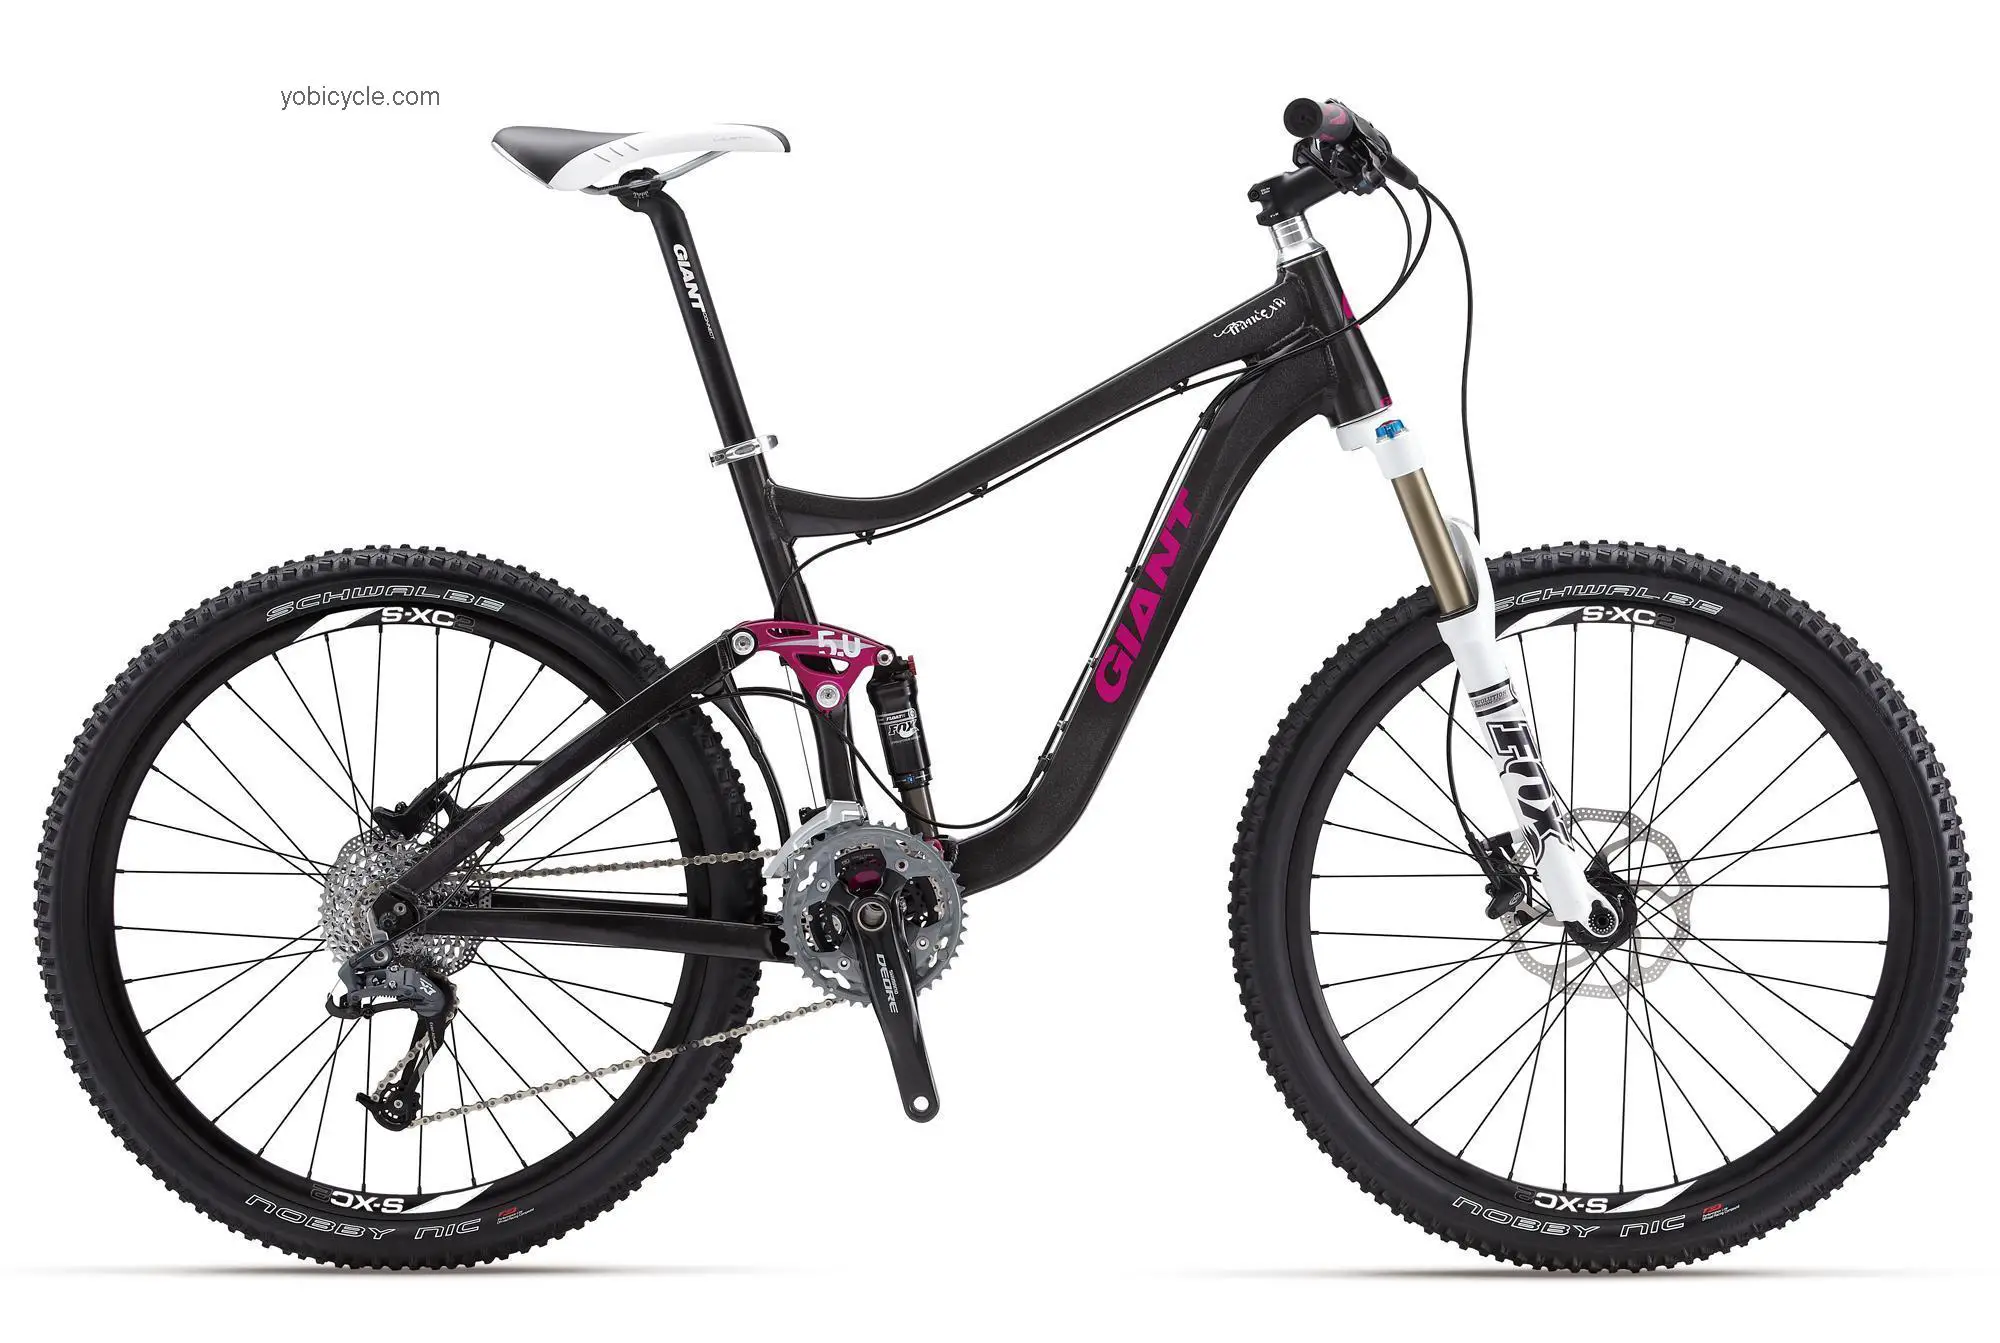 Giant Trance X2 W 2012 comparison online with competitors